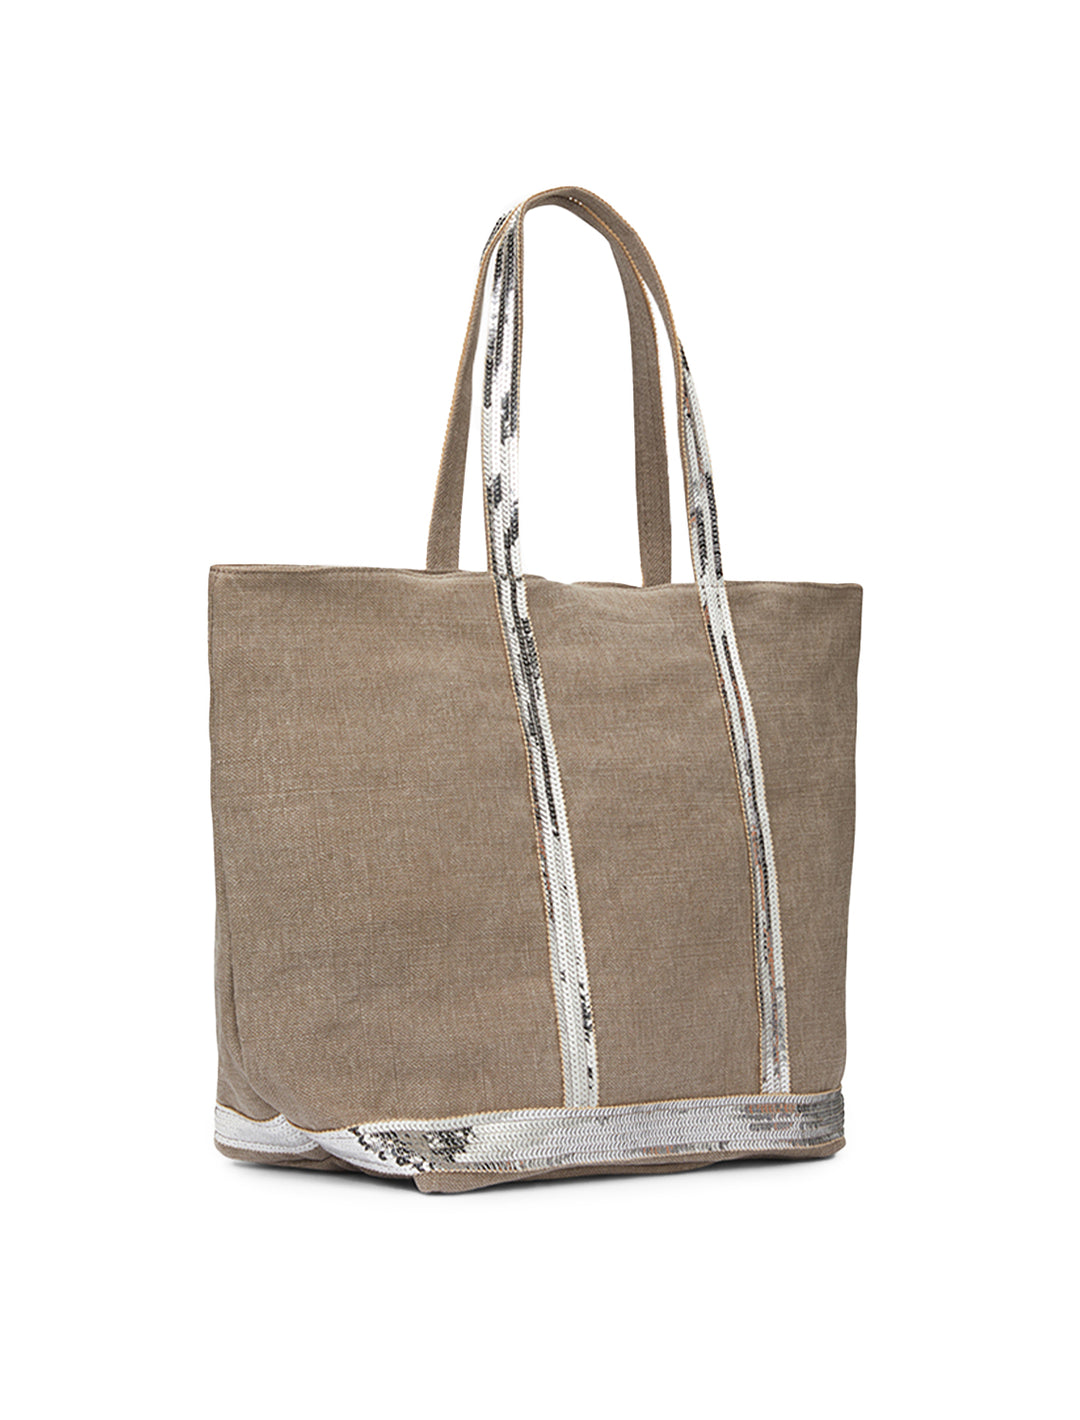 Front angle view of Vanessa Bruno's cabas large tote in calcaire.